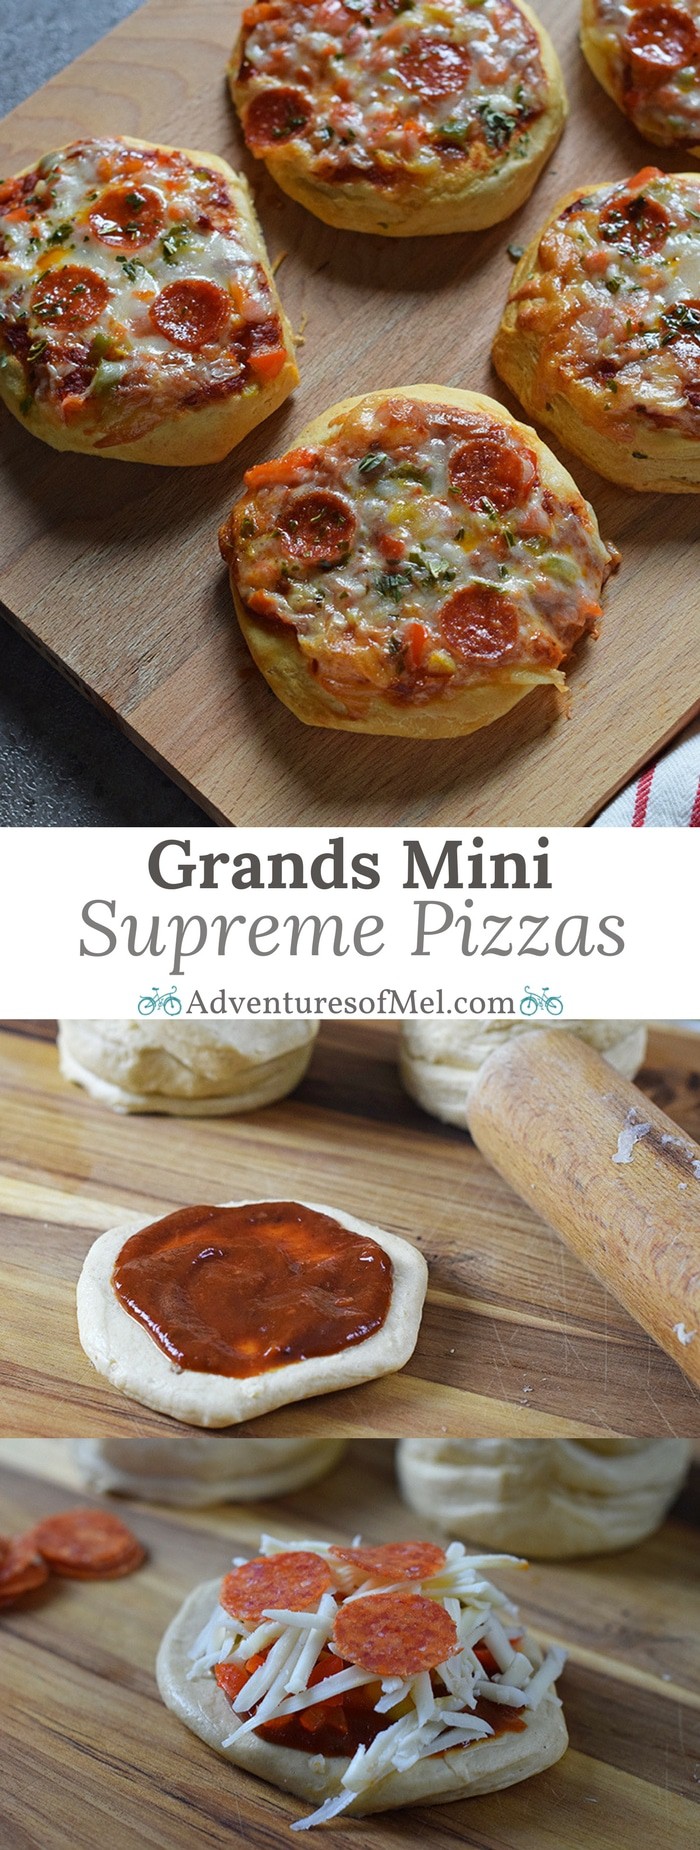 Grands Mini Supreme Pizzas are a quick and easy dinner recipe with Grands Biscuits, pizza sauce, veggies, mozzarella cheese, pepperoni, and basil.